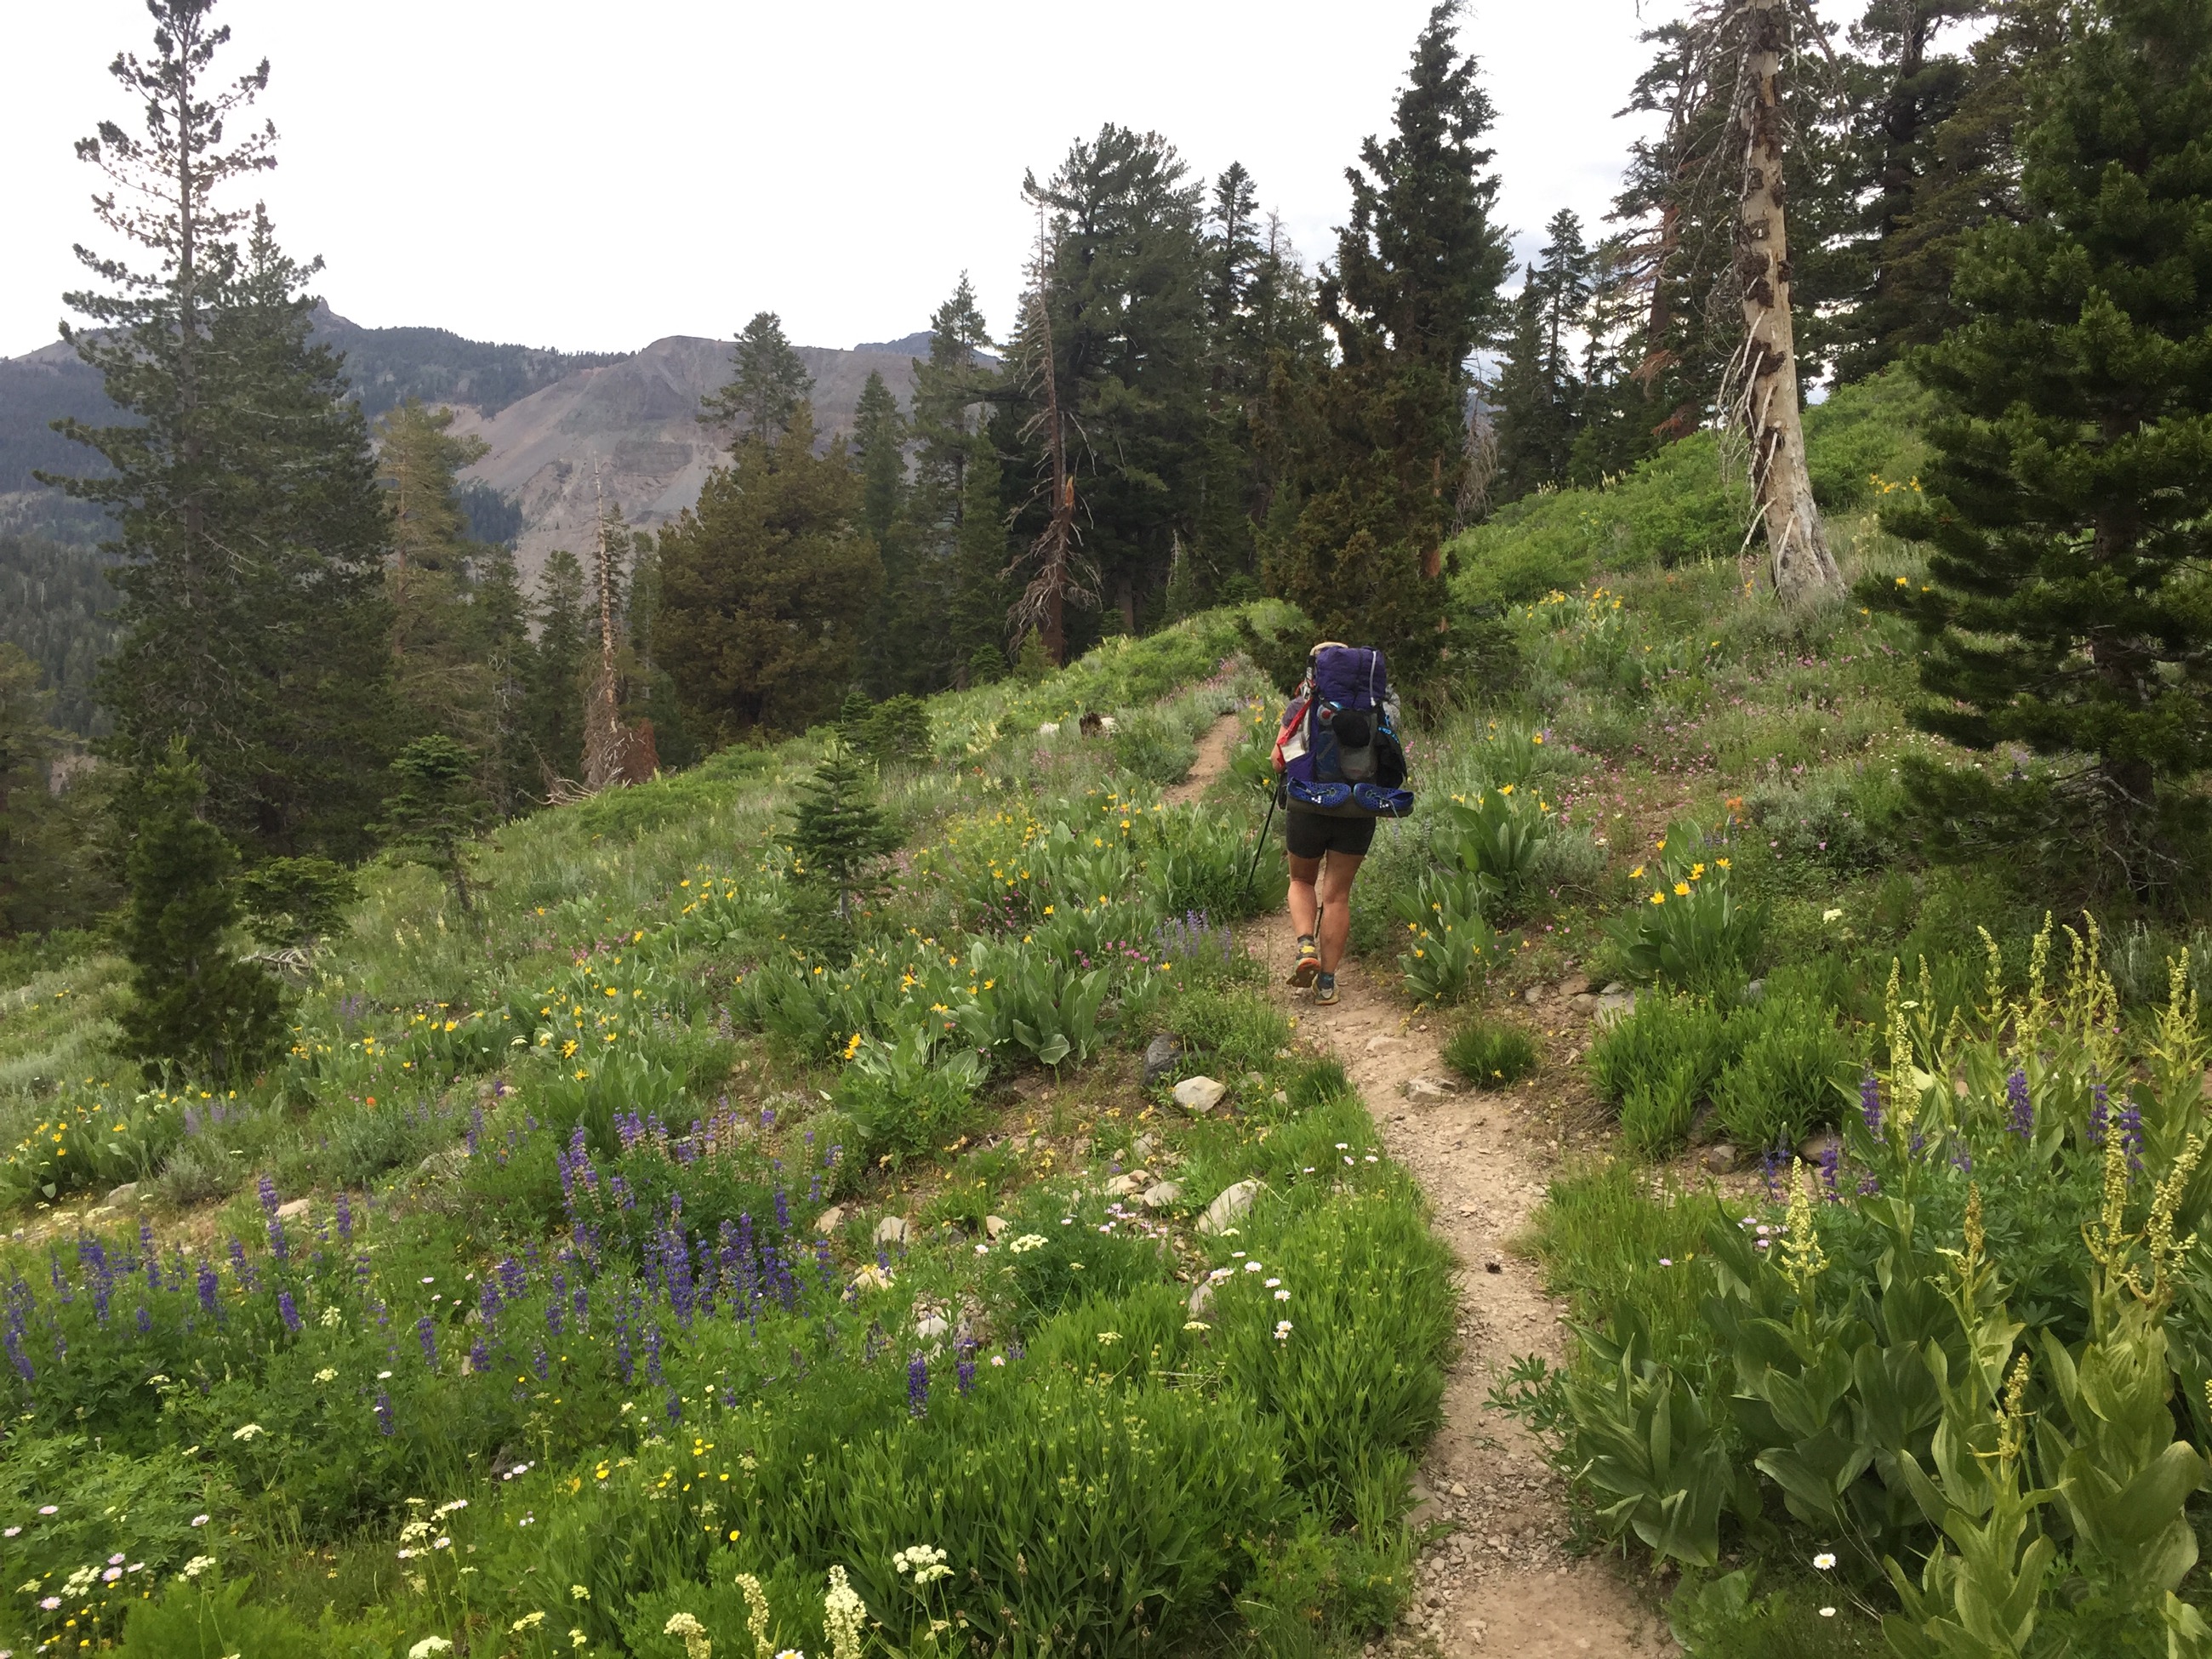 Day 82: Of Wildflowers, Green Hills, and Familiar Passes